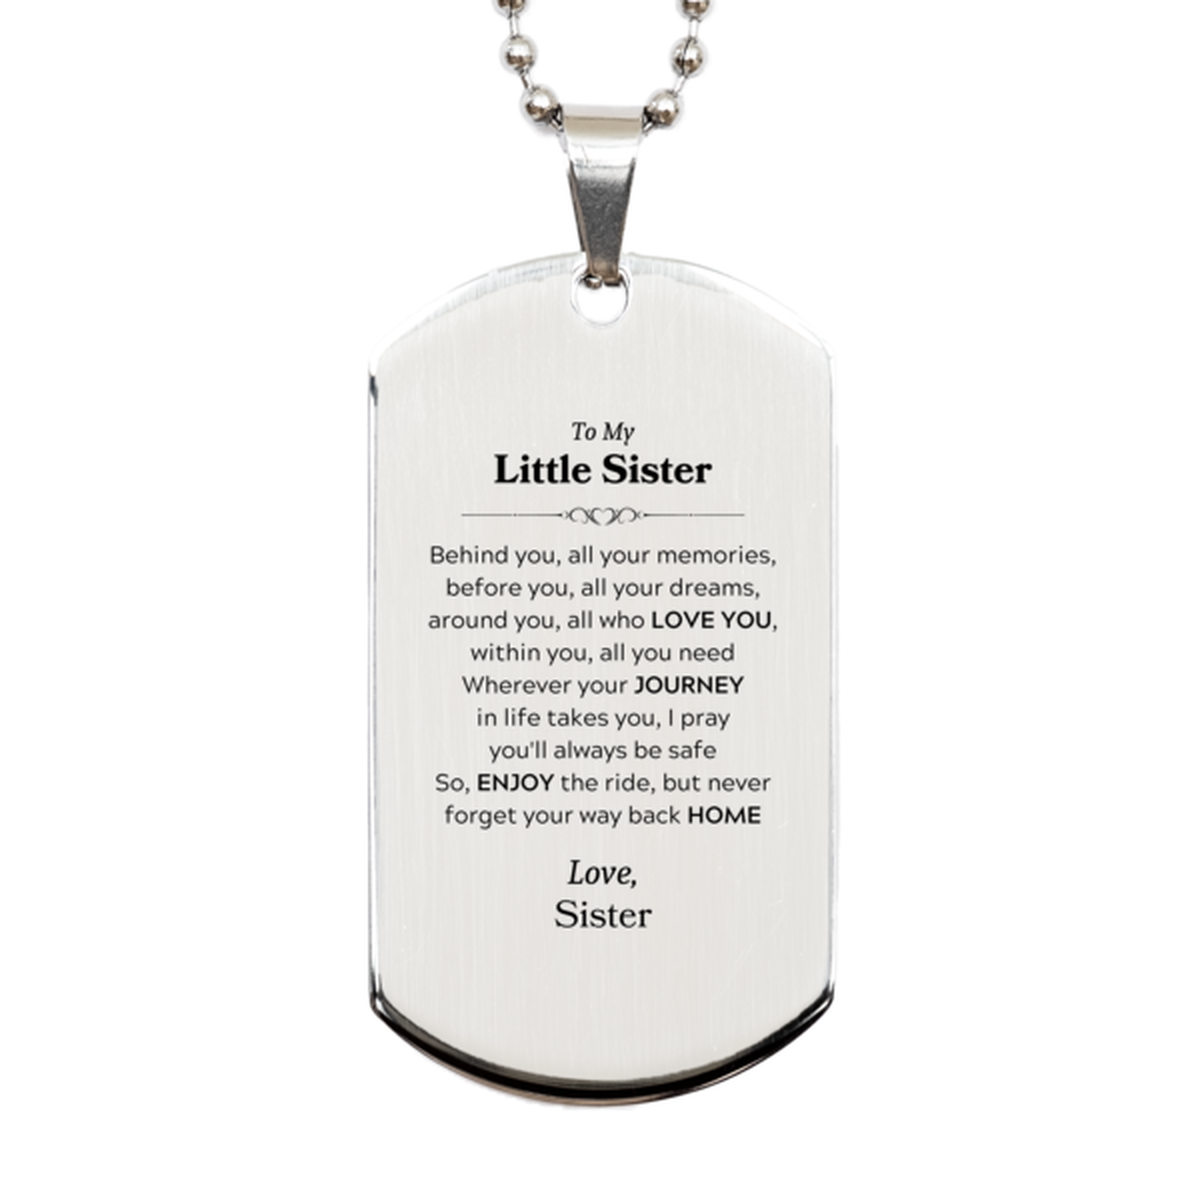 To My Little Sister Graduation Gifts from Sister, Little Sister Silver Dog Tag Christmas Birthday Gifts for Little Sister Behind you, all your memories, before you, all your dreams. Love, Sister